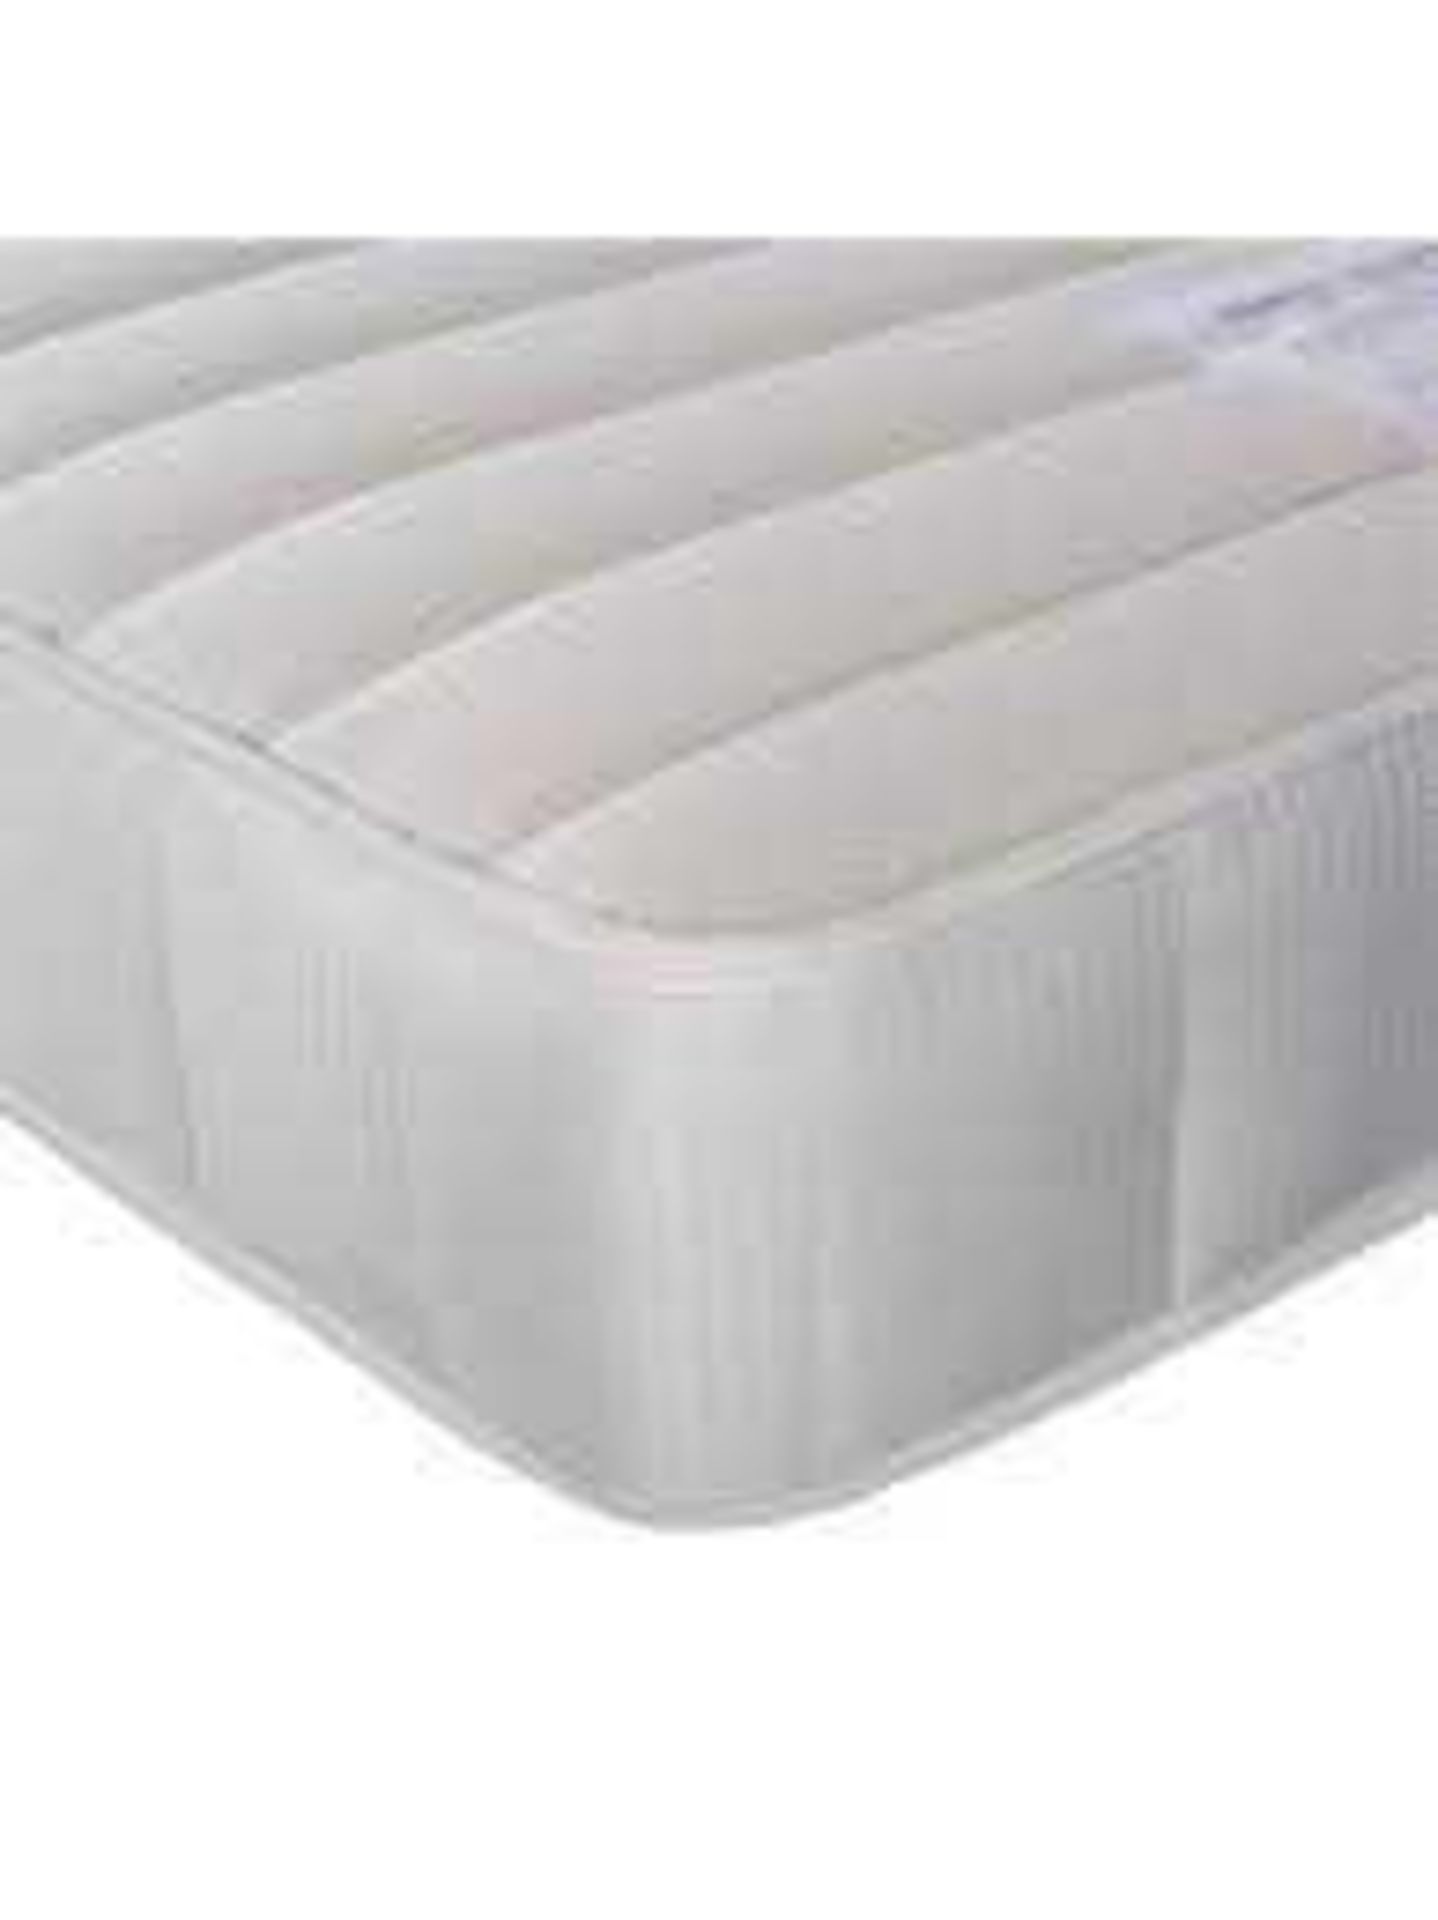 RRP £230 Bagged John Lewis Anyday Essentials Collection Pocket 1000 Memory Mattress